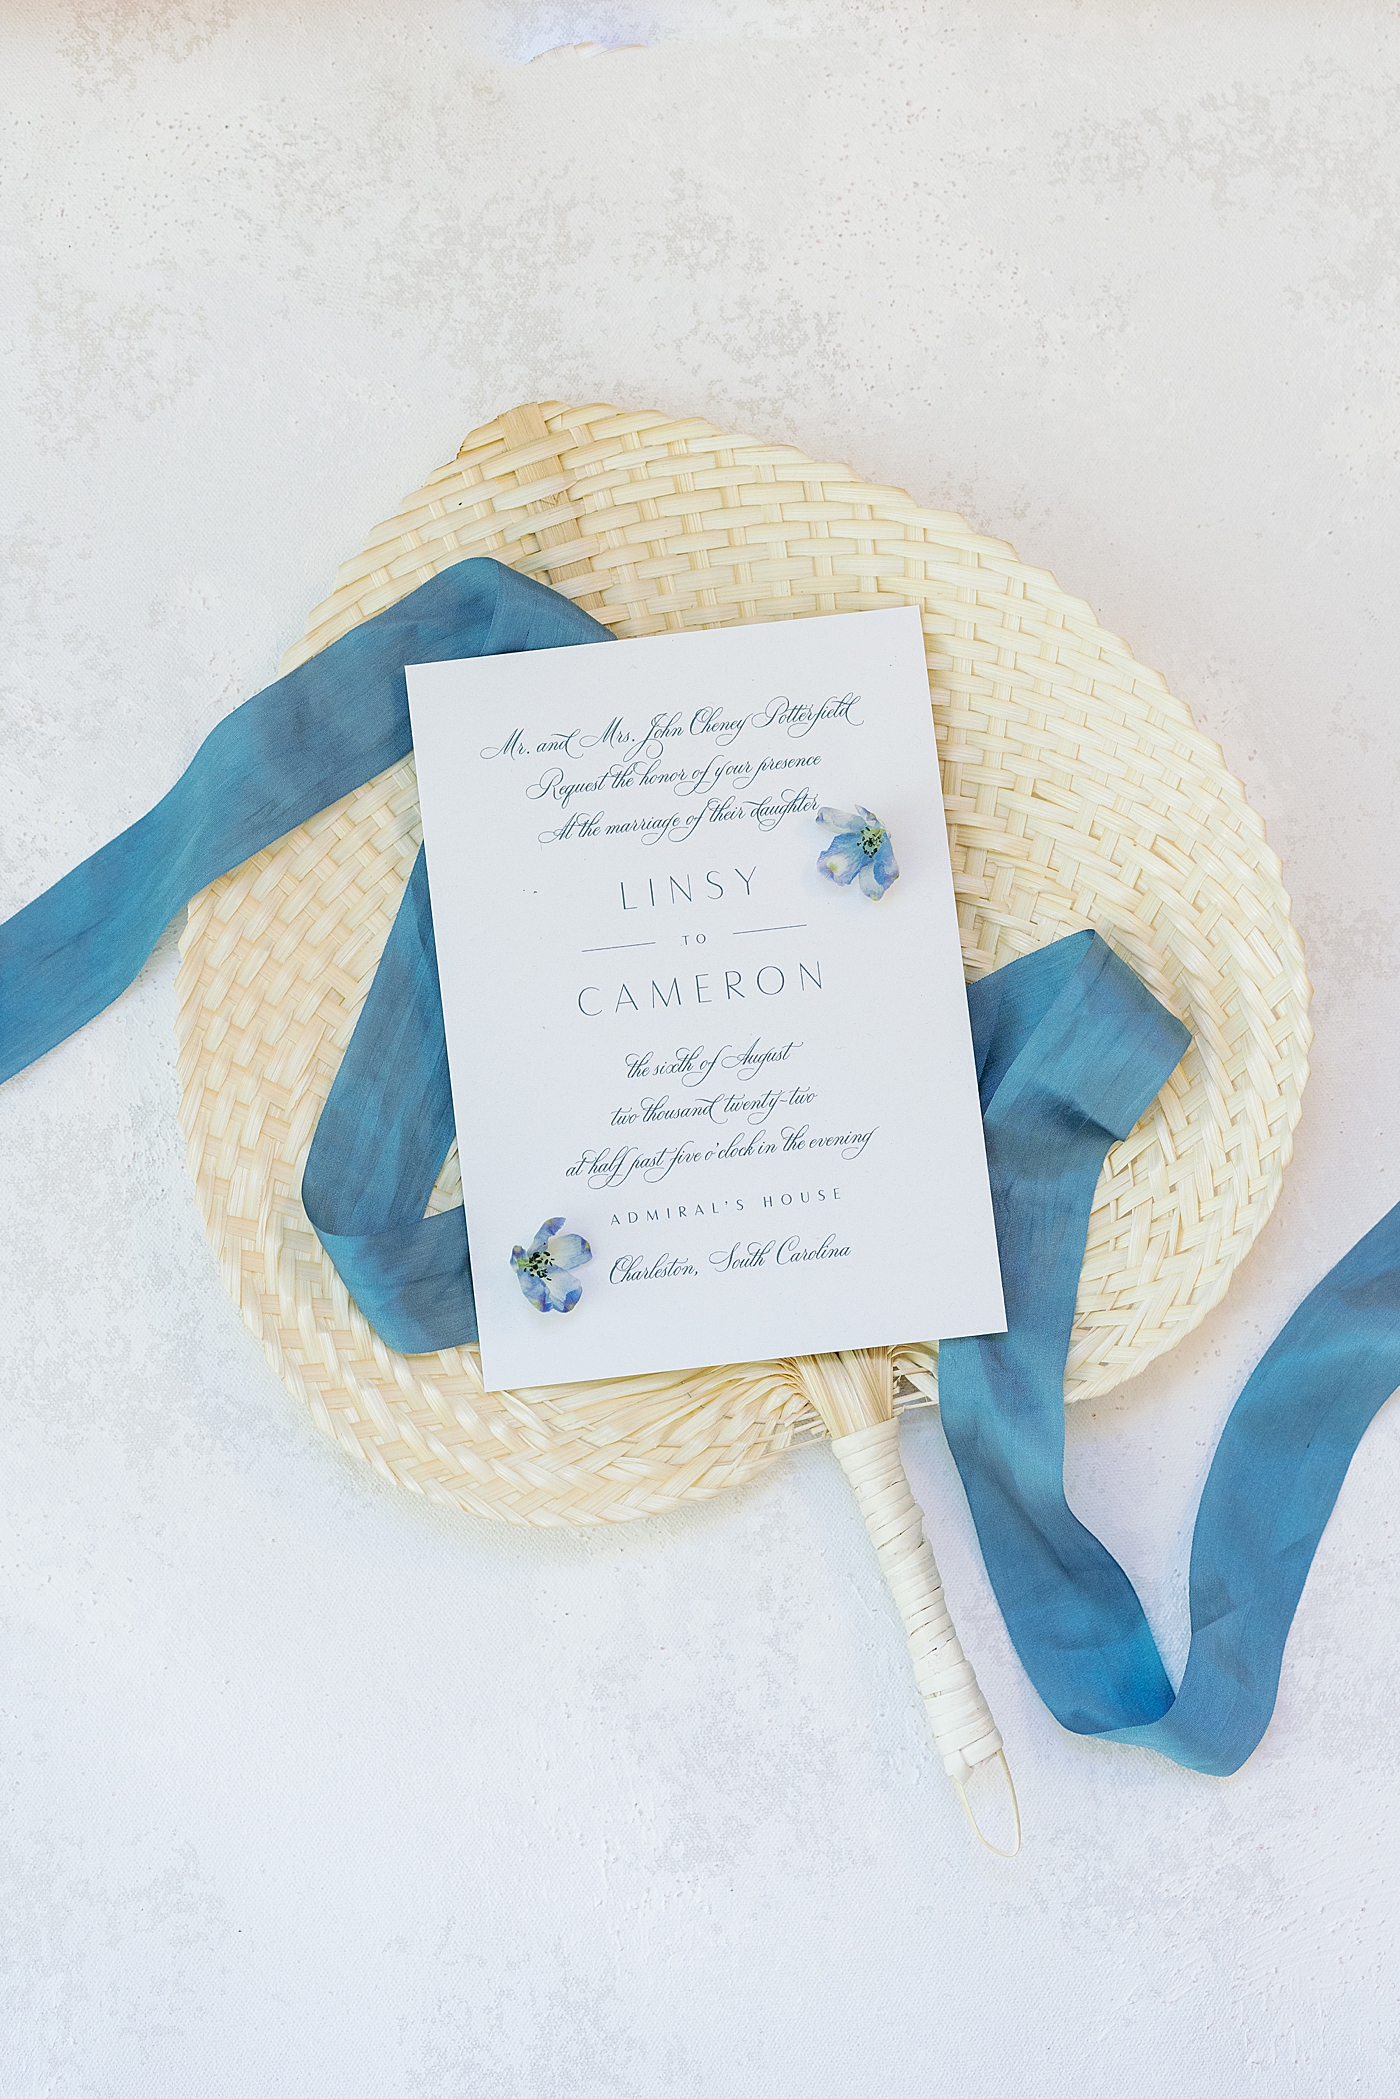 Wedding invitation styled on a sweetgrass fan and blue ribbon | Images by Annie Laura Photography